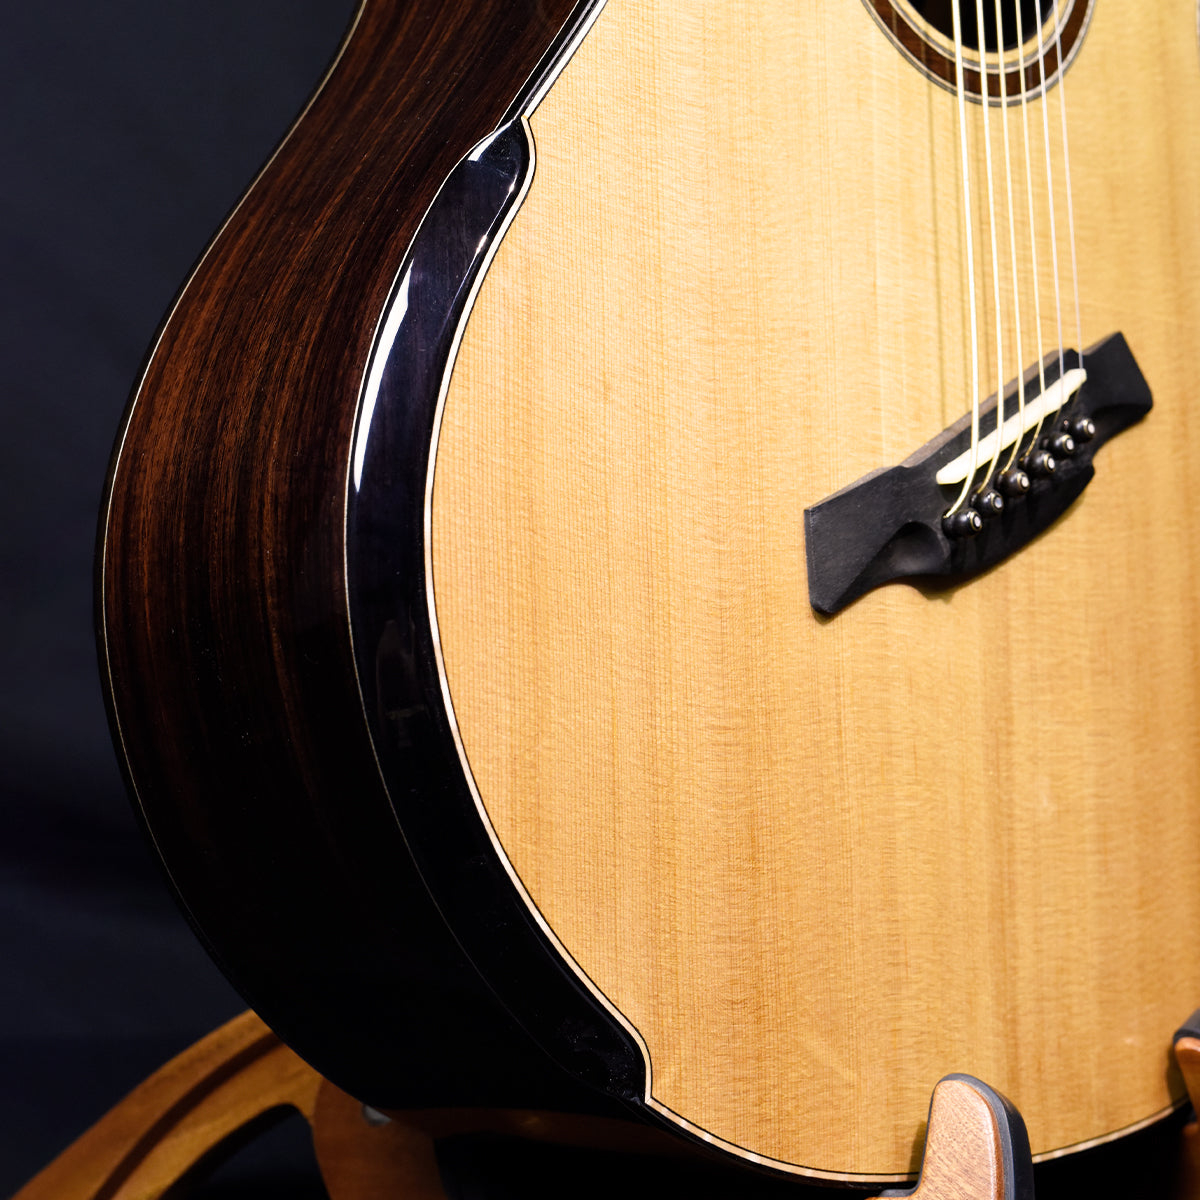 MJ Fanned Fret Sitka with Indian Rosewood